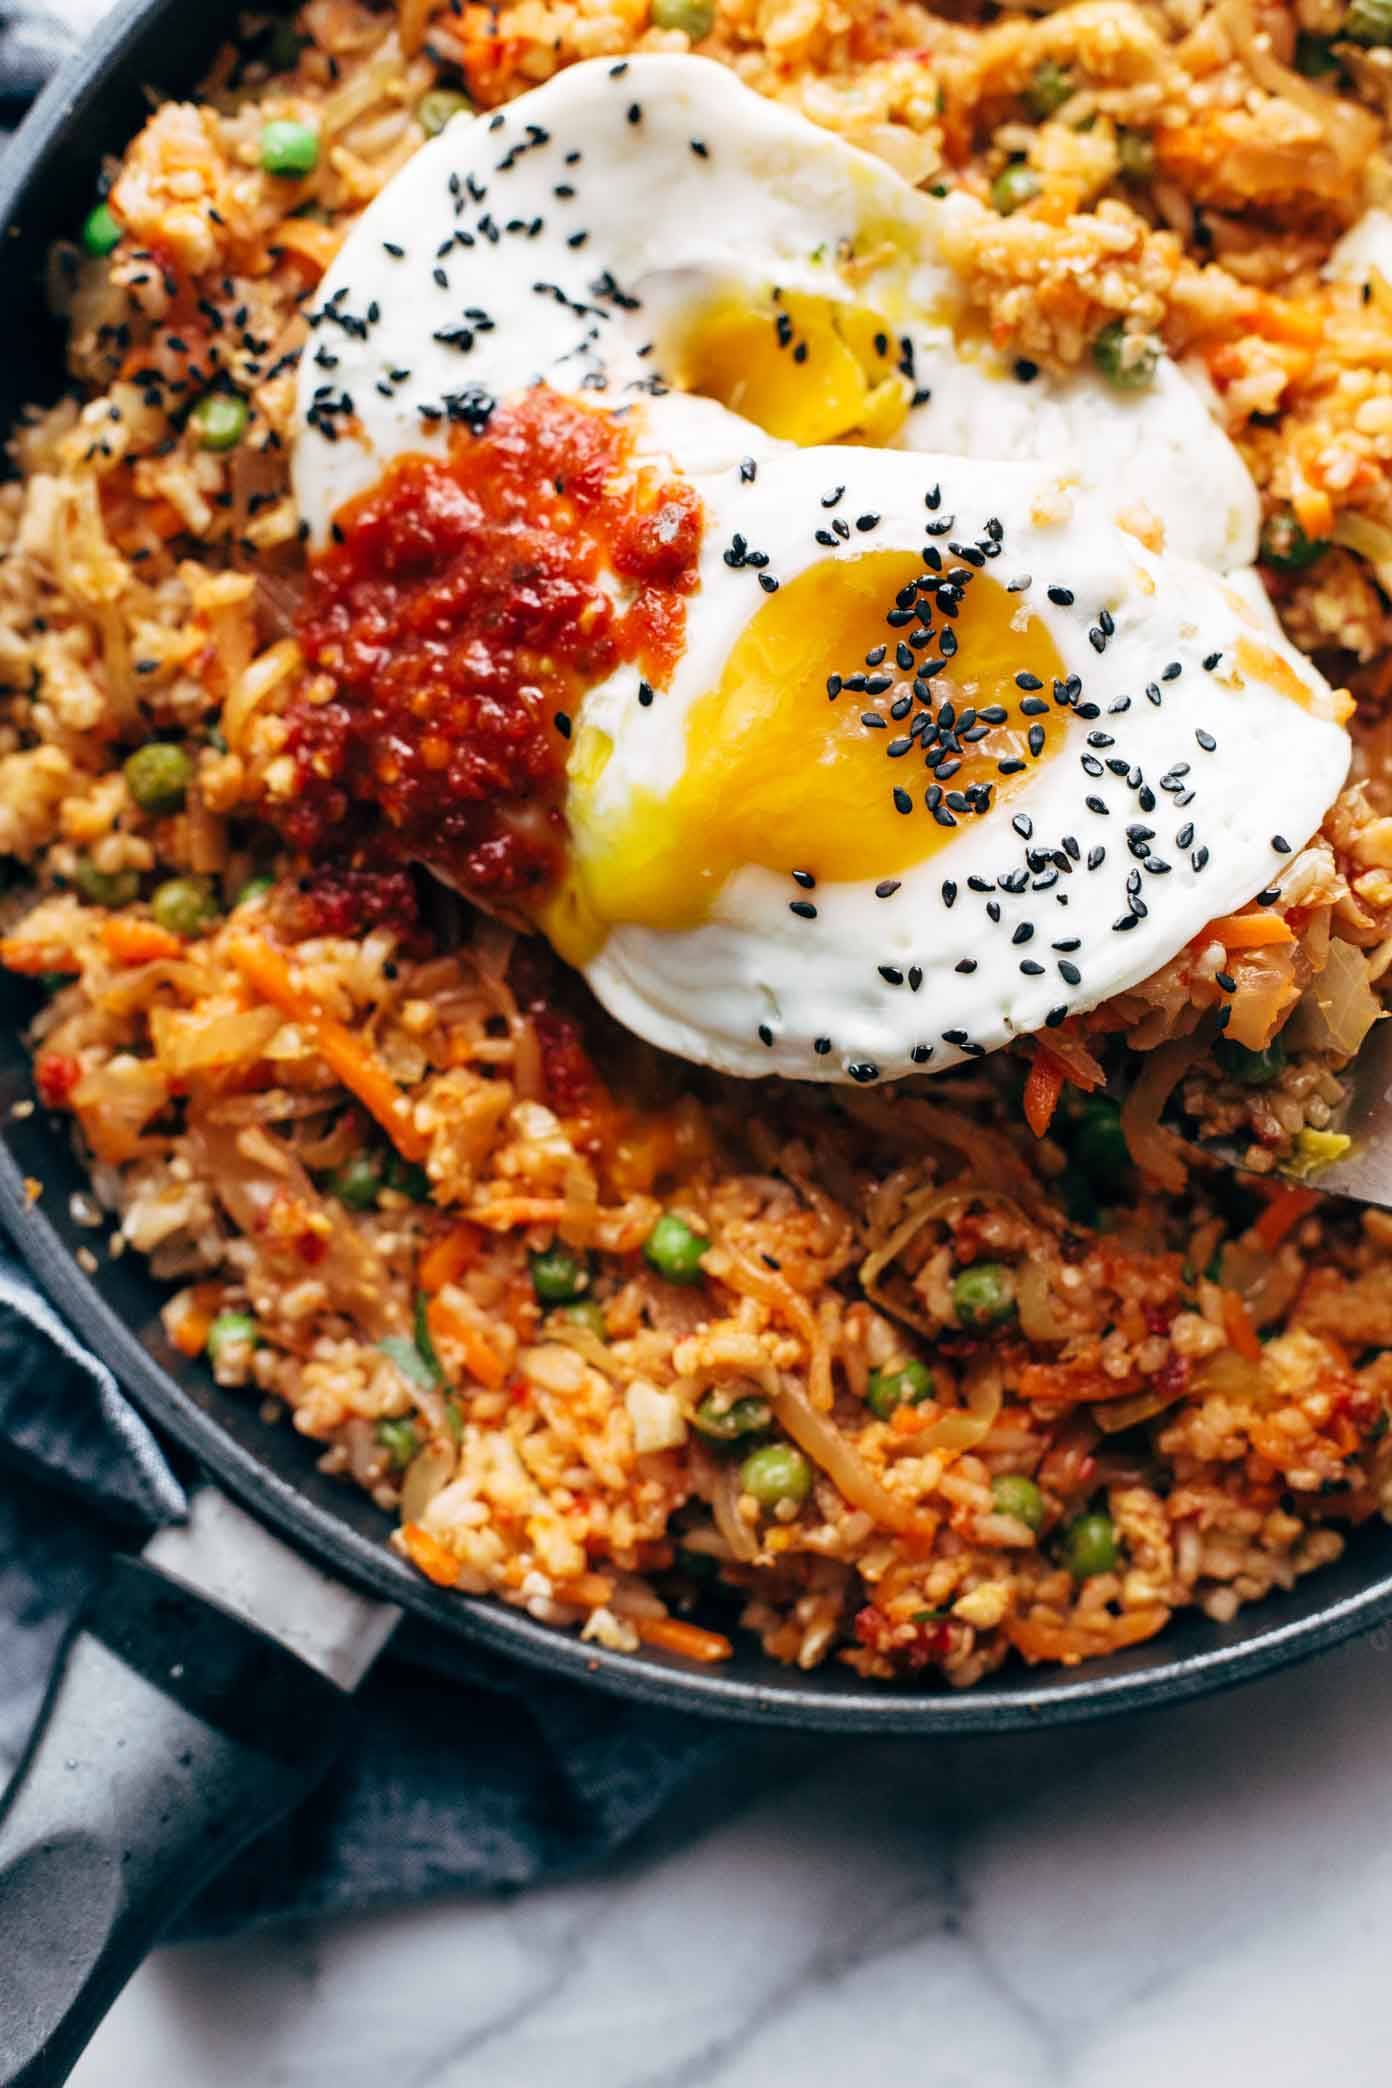 kimchi fried rice in pan with egg